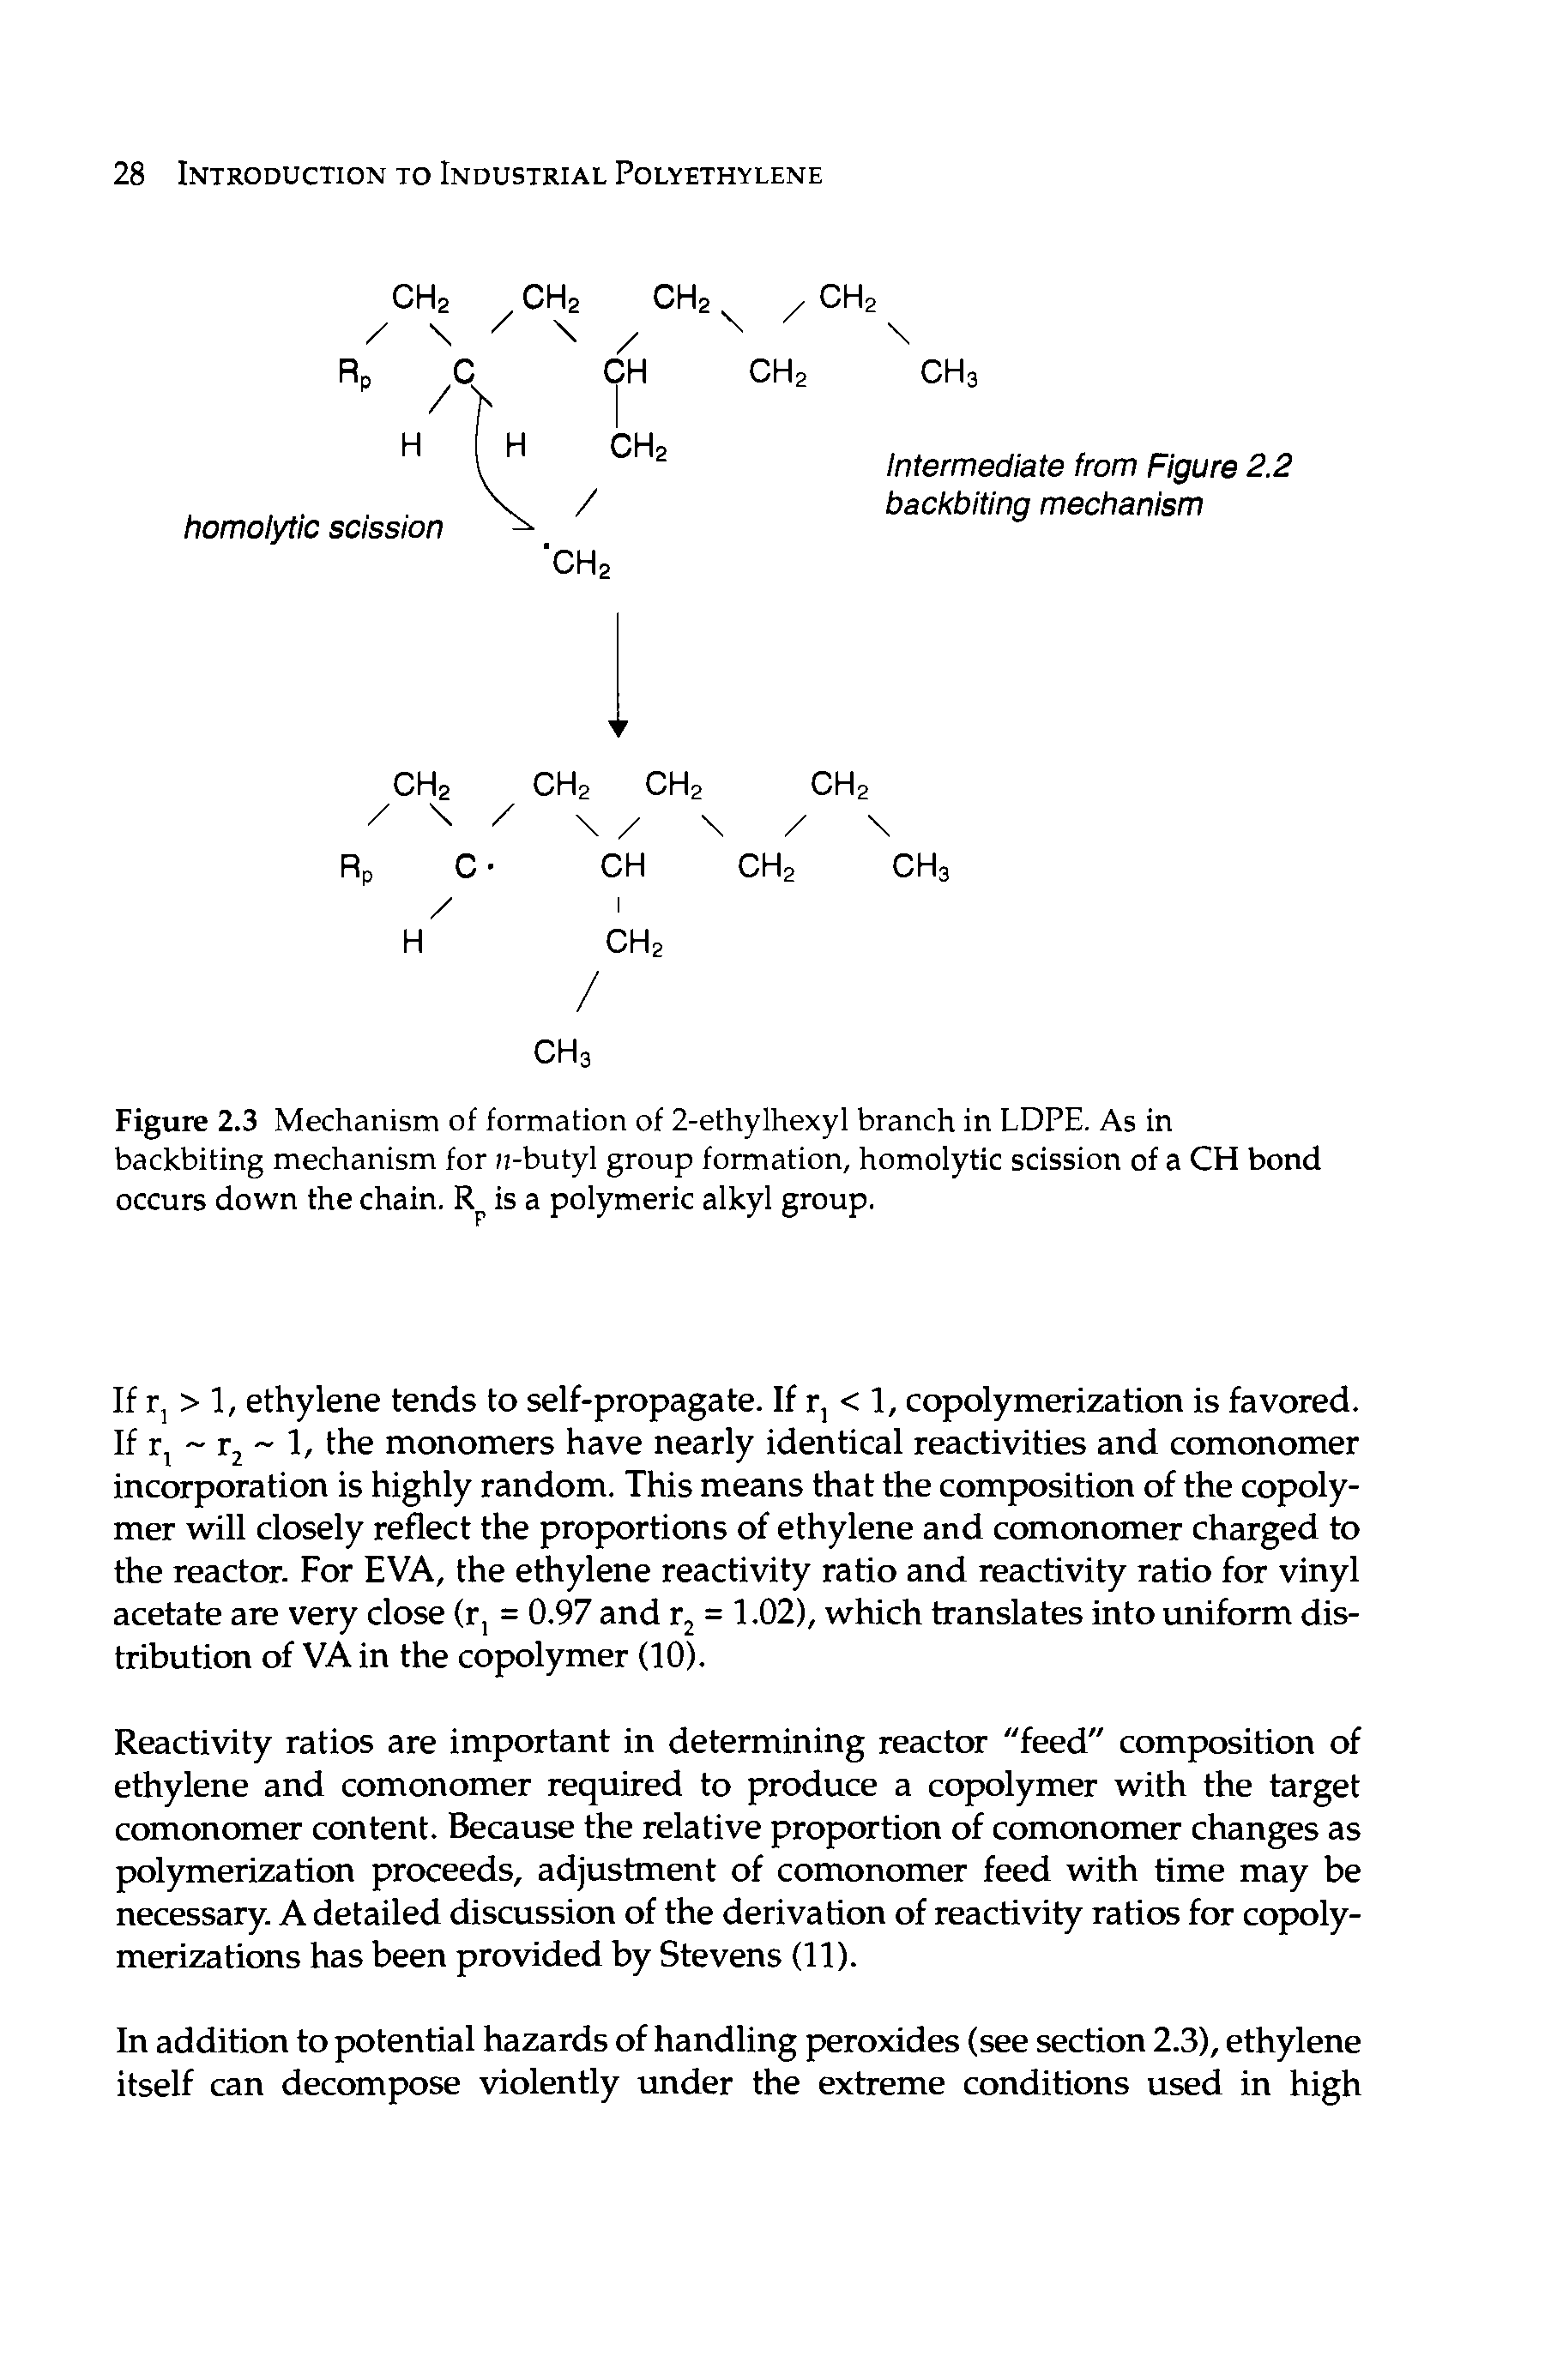 Figure 2.3 Mechanism of formation of 2-ethylhexyl branch in LDPE. As in backbiting mechanism for n-butyl group formation, homolytic scission of a CH bond occurs down the chain. is a polymeric alkyl group.